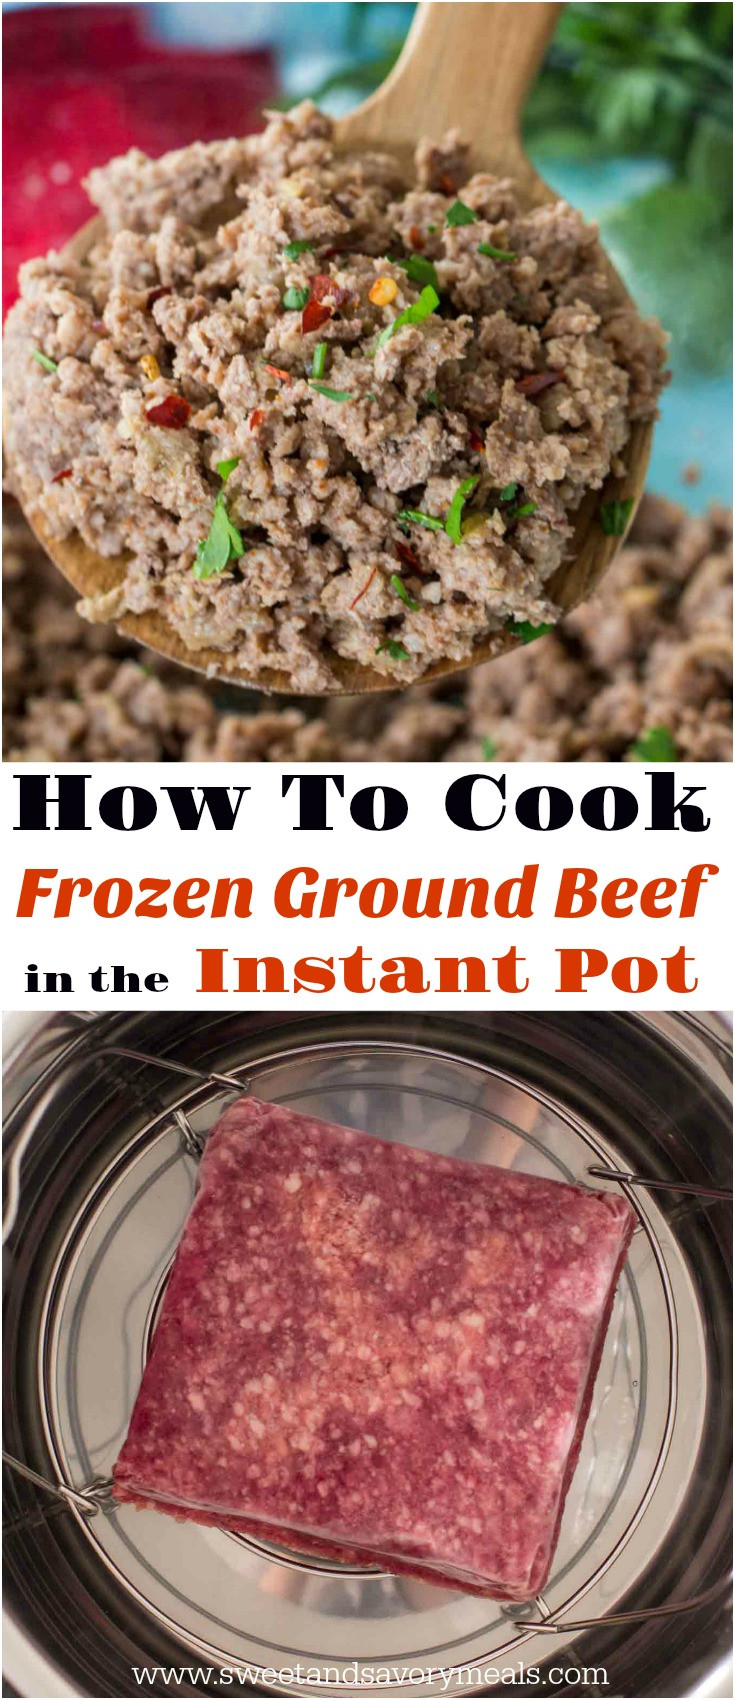 What To Cook With Ground Beef
 How To Cook Frozen Ground Beef In The Instant Pot Sweet